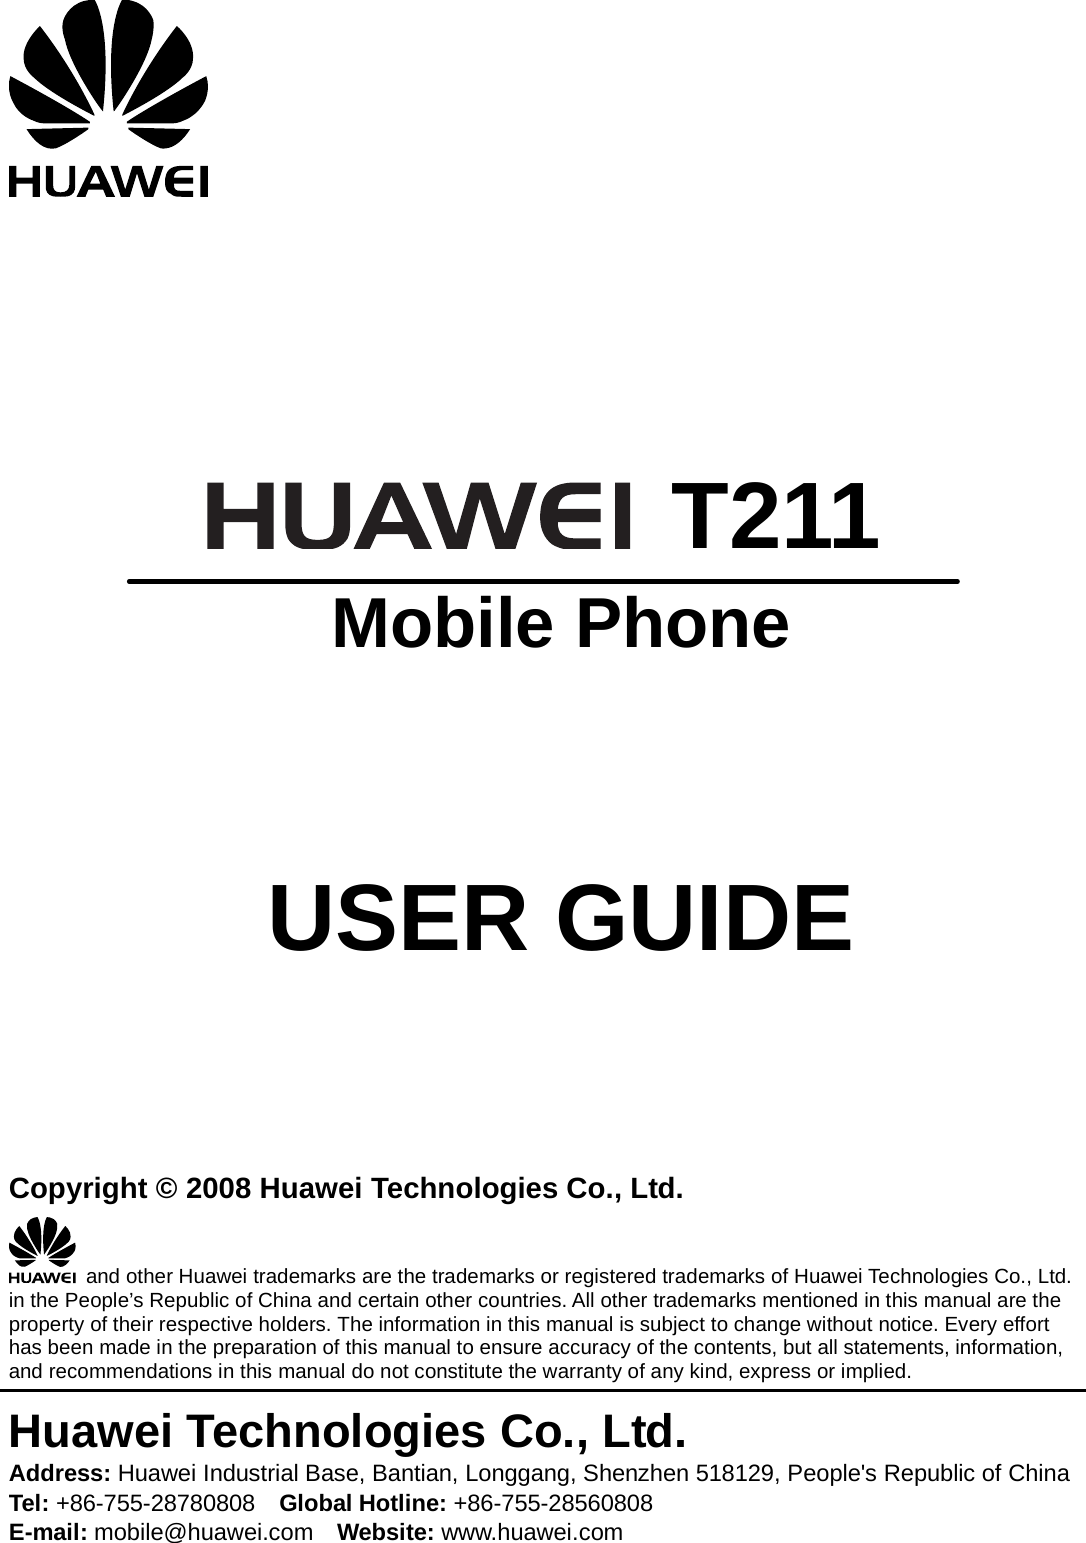       T211  Mobile Phone     USER GUIDE    Copyright © 2008 Huawei Technologies Co., Ltd.   and other Huawei trademarks are the trademarks or registered trademarks of Huawei Technologies Co., Ltd. in the People’s Republic of China and certain other countries. All other trademarks mentioned in this manual are the property of their respective holders. The information in this manual is subject to change without notice. Every effort has been made in the preparation of this manual to ensure accuracy of the contents, but all statements, information, and recommendations in this manual do not constitute the warranty of any kind, express or implied. Huawei Technologies Co., Ltd. Address: Huawei Industrial Base, Bantian, Longgang, Shenzhen 518129, People&apos;s Republic of China Tel: +86-755-28780808    Global Hotline: +86-755-28560808 E-mail: mobile@huawei.com    Website: www.huawei.com 